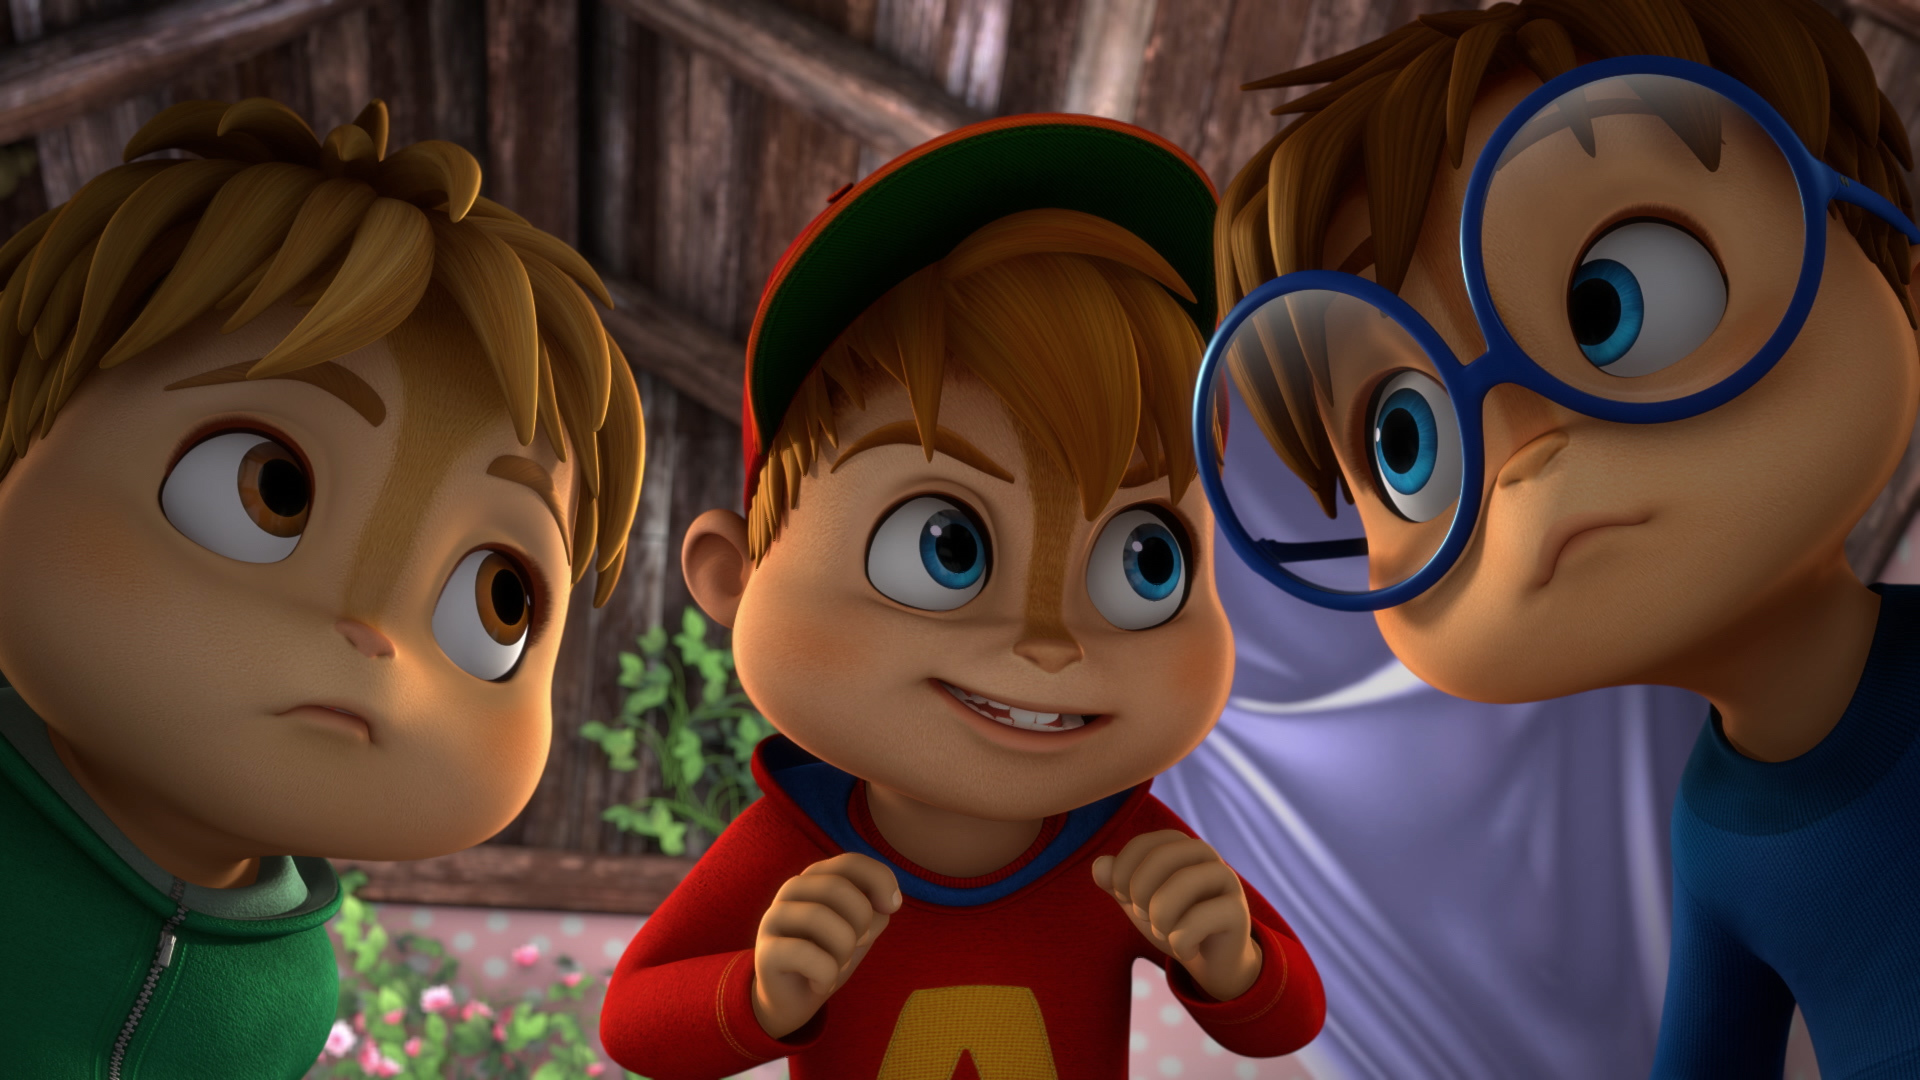 Watch ALVINNN!!! and The Chipmunks Season 1 Episode 3: Sister Act/Lil - What Channel Is Alvin And The Chipmunks On